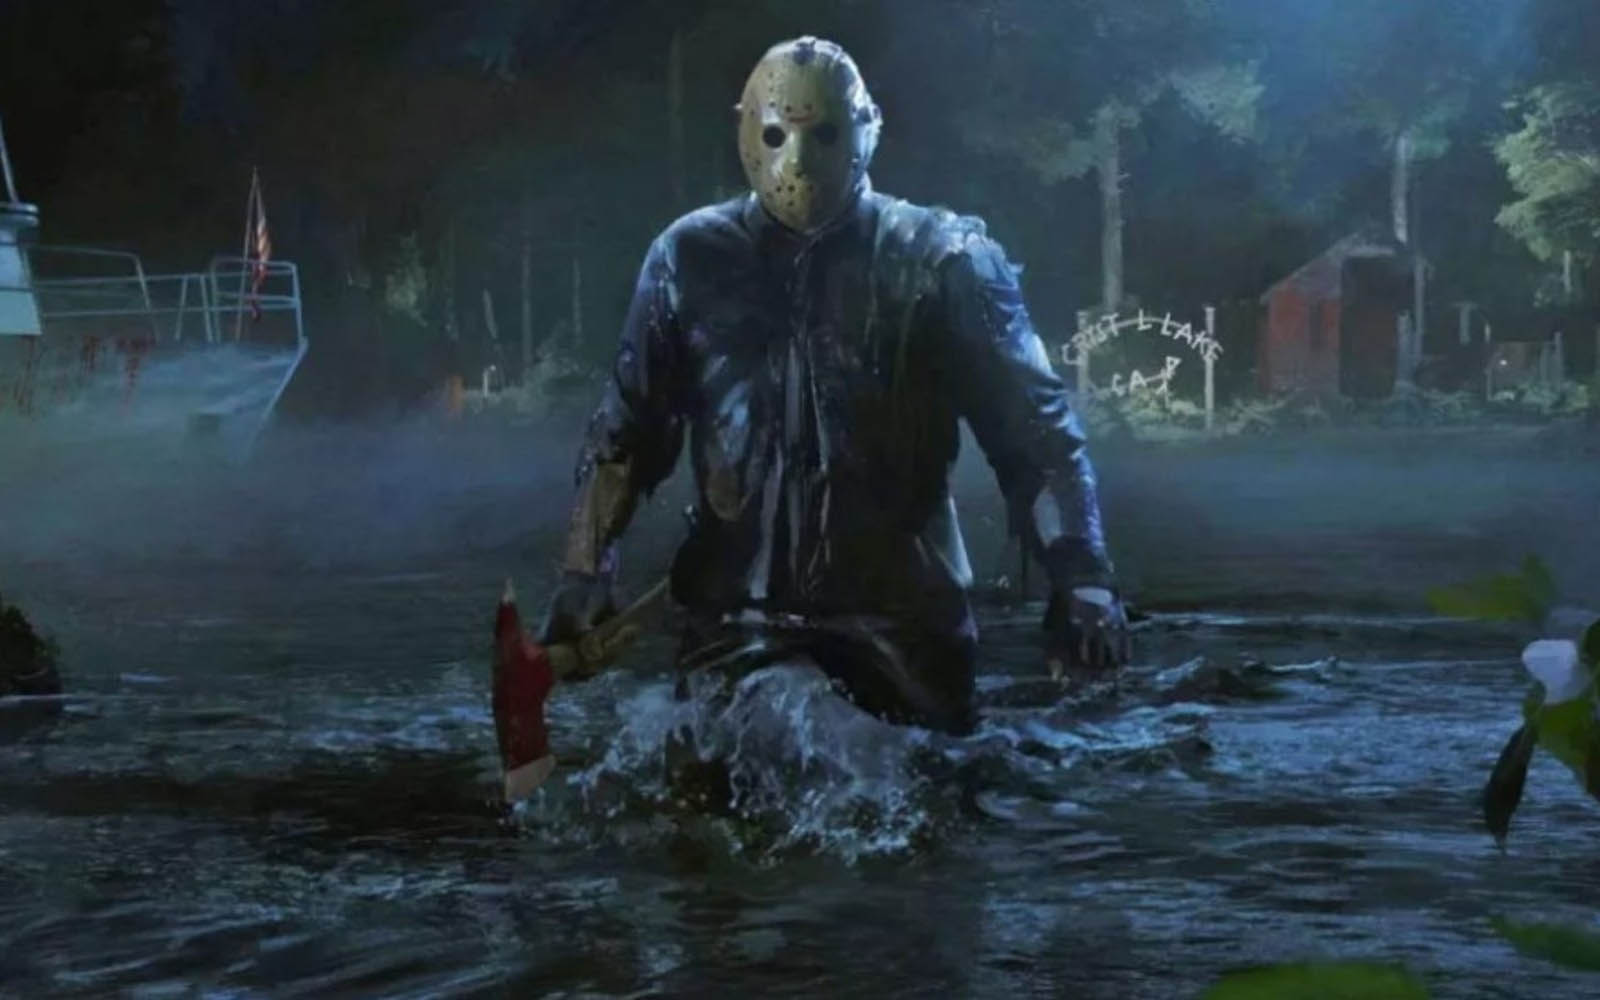 friday the 13th film franchise wiki